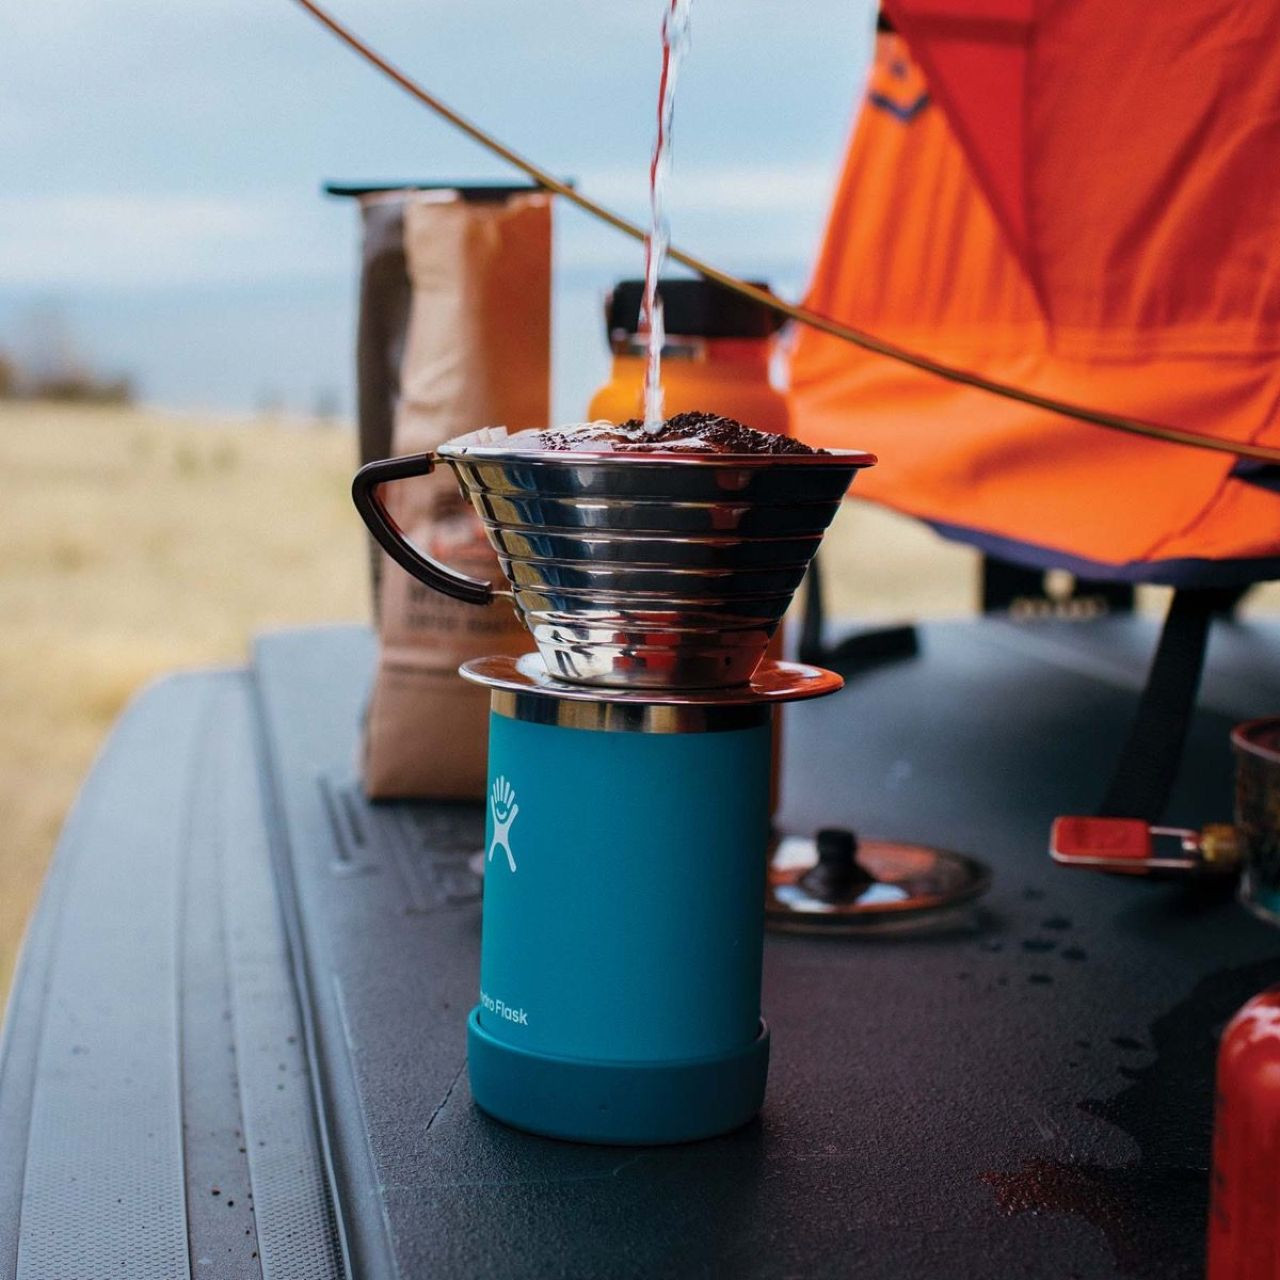 HydroFlask 12oz Cooler Cup